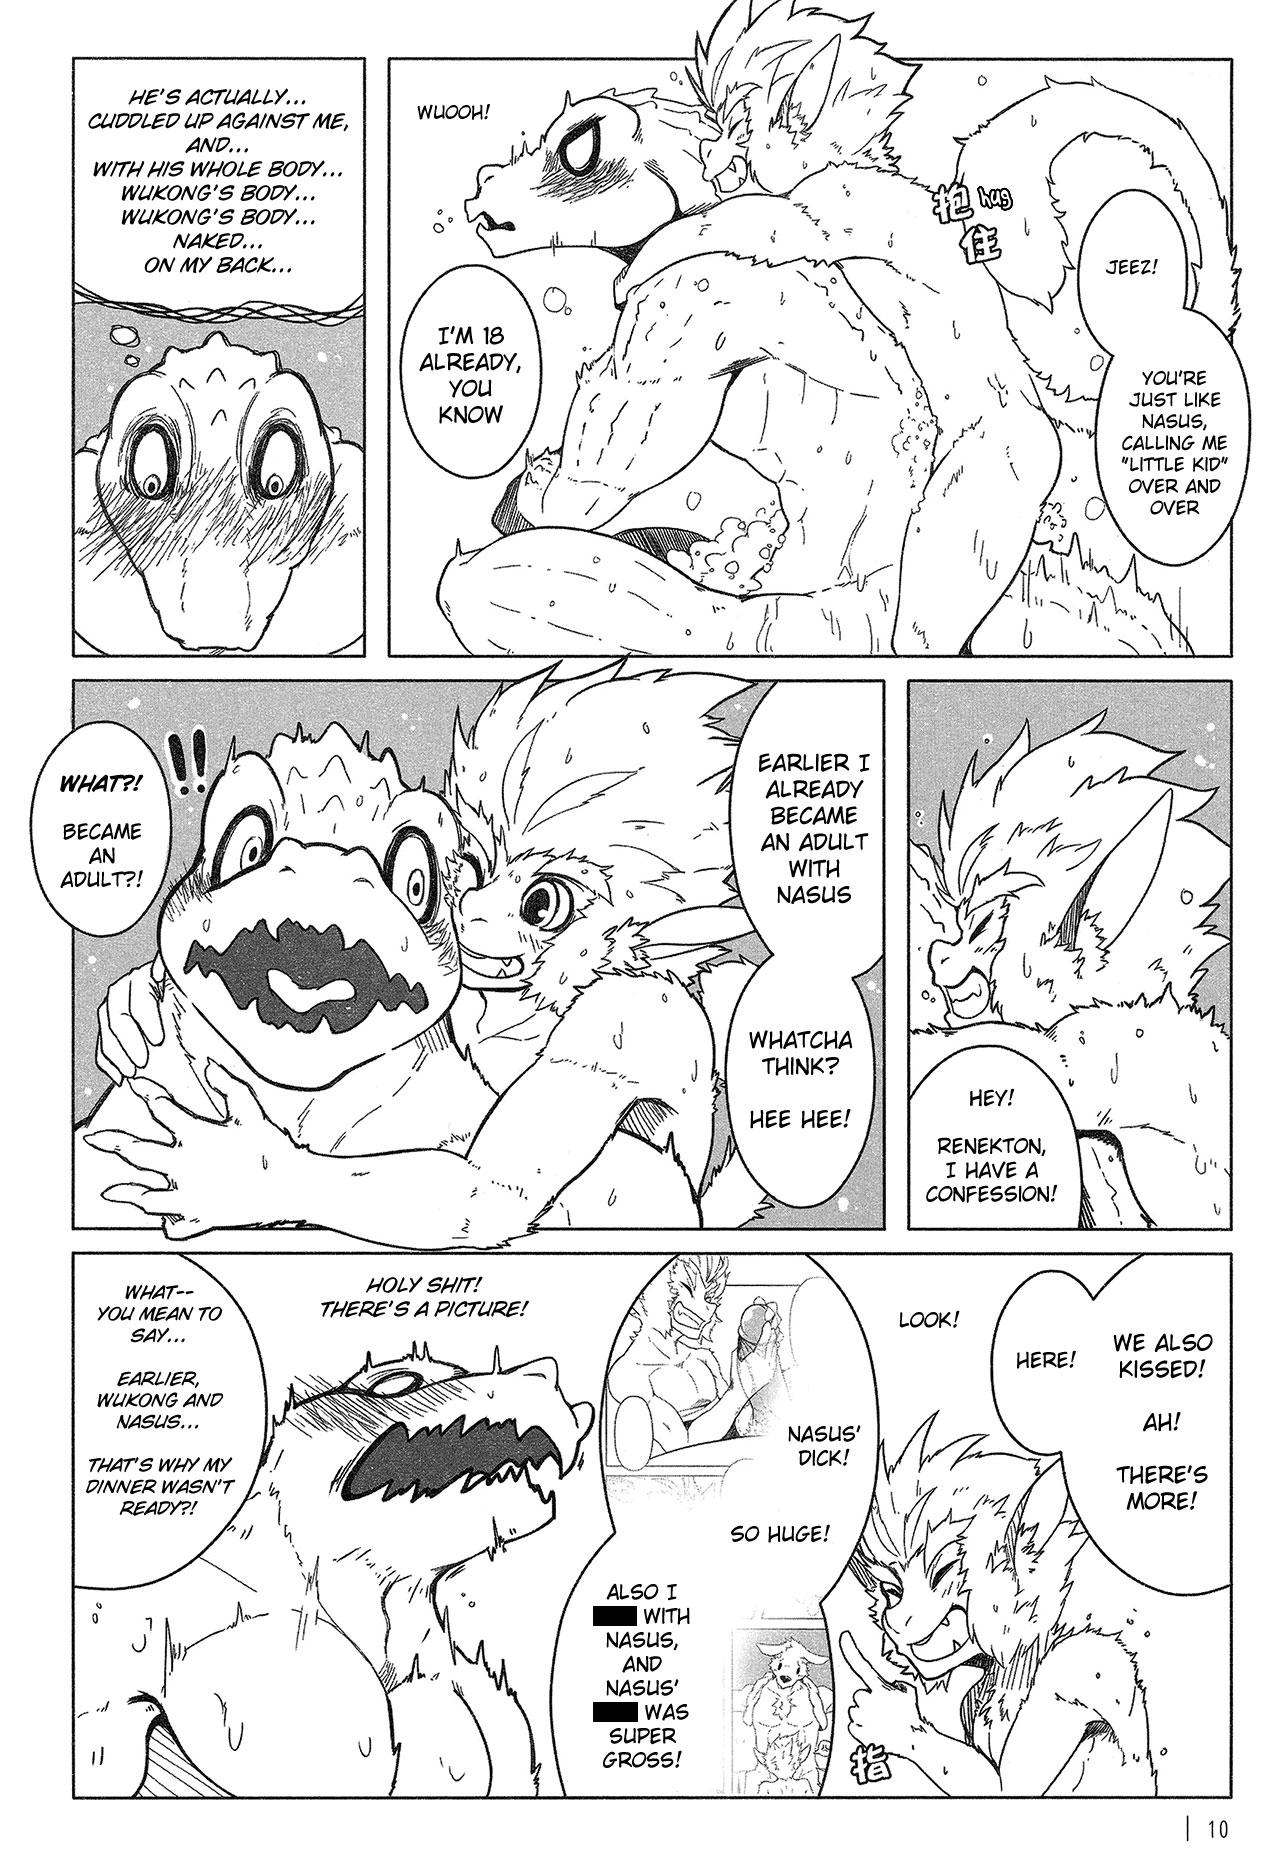 Submissive Rebel Hero 2 - League of legends Gay Pissing - Page 11